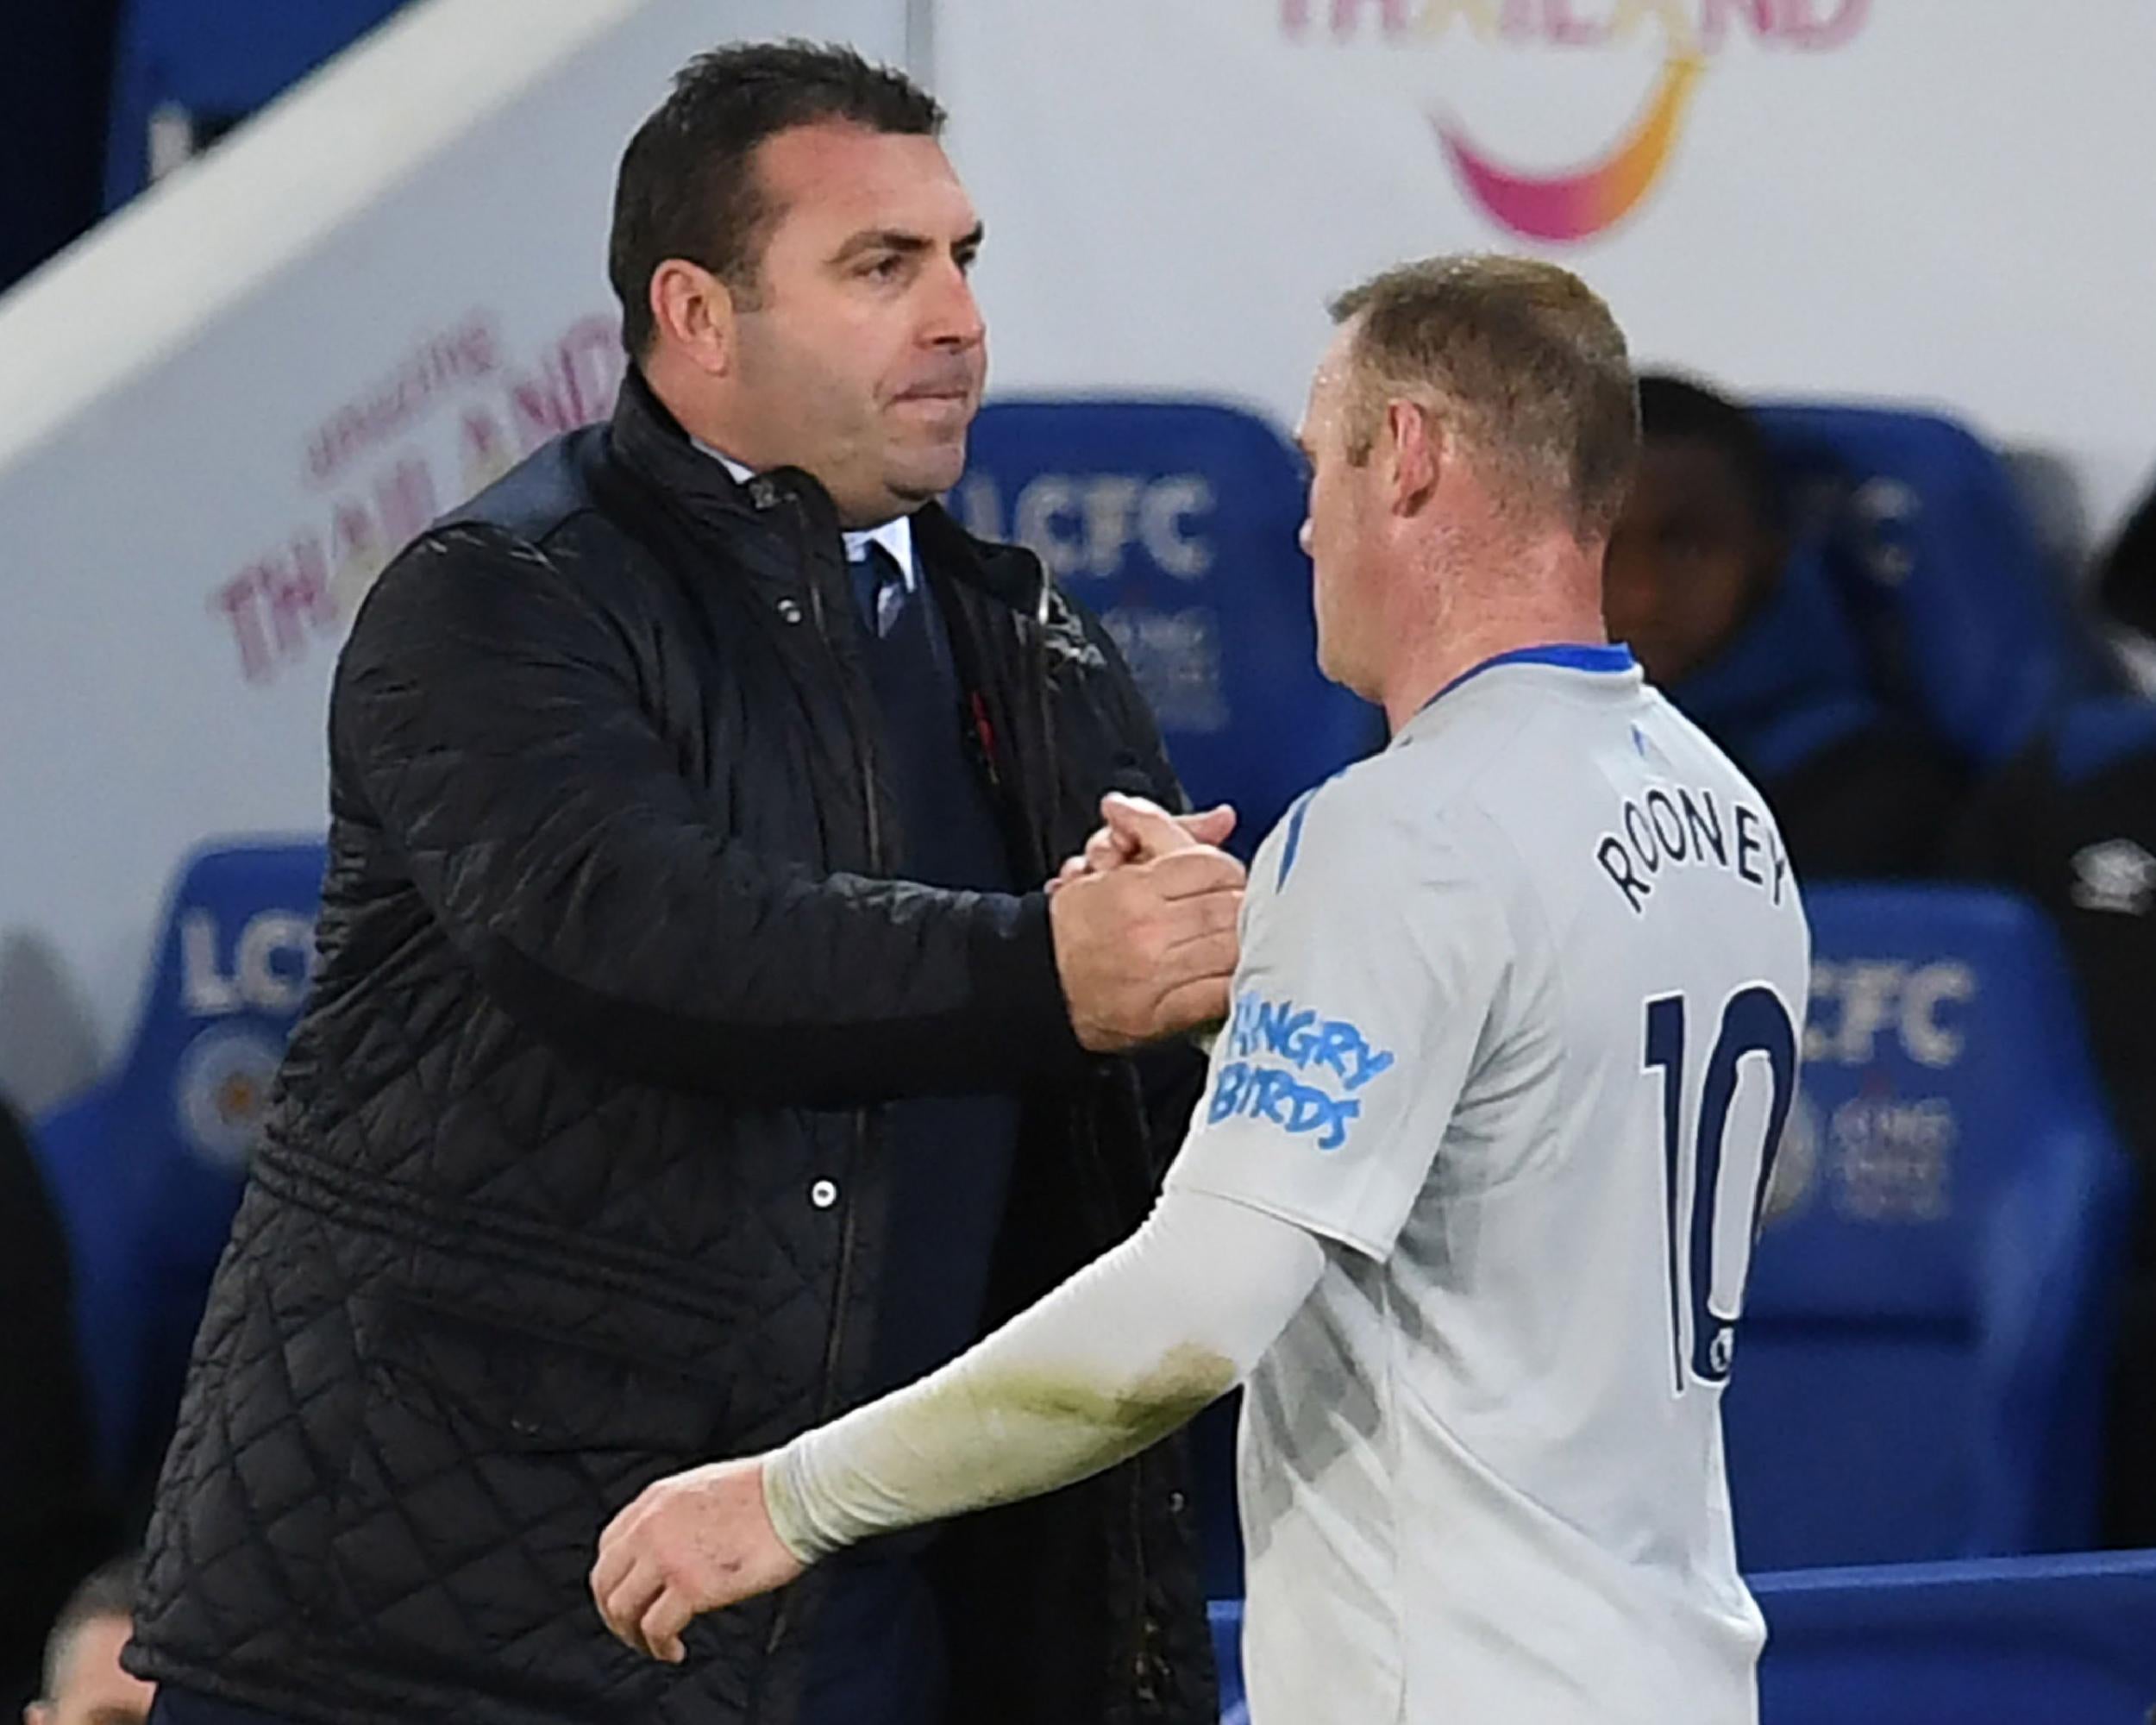 Unsworth has felt Wayne Rooney, among others, at home